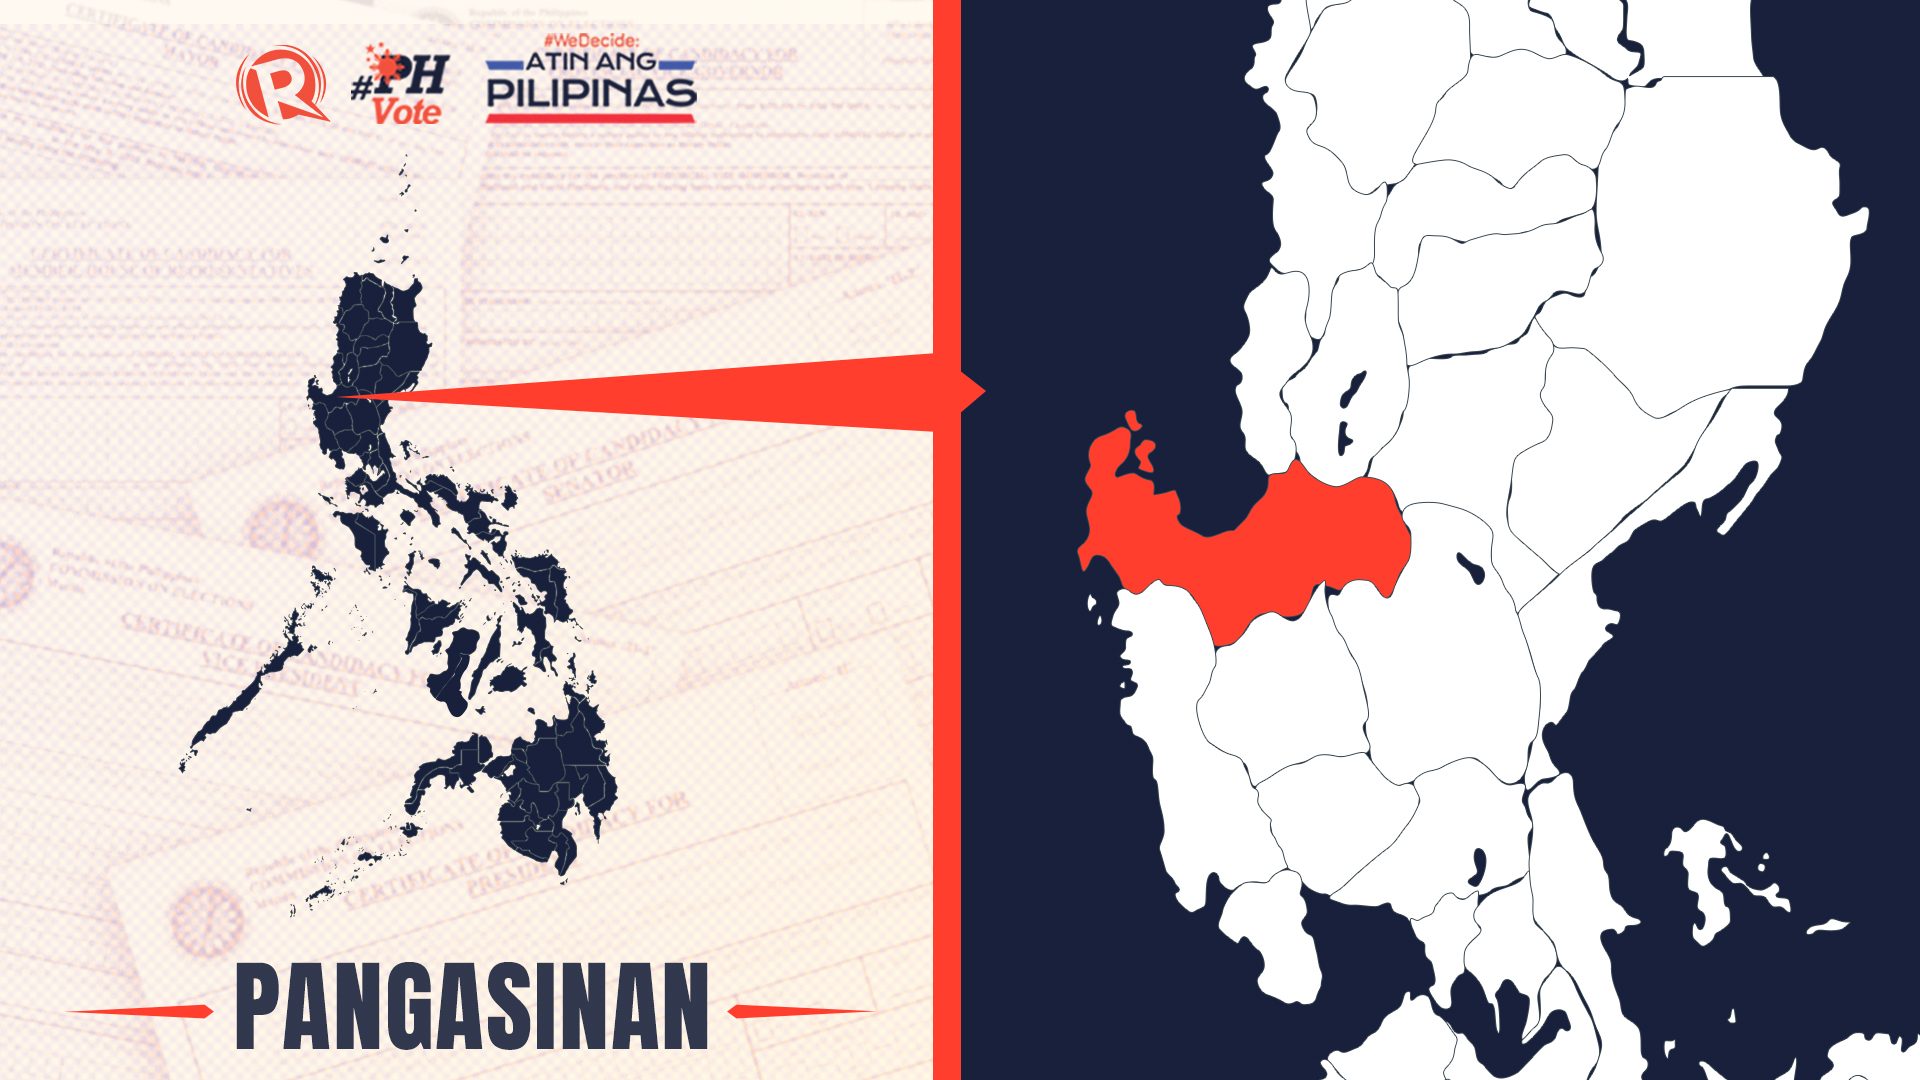 LIST: Who is running in Pangasinan in the 2022 Philippine elections?